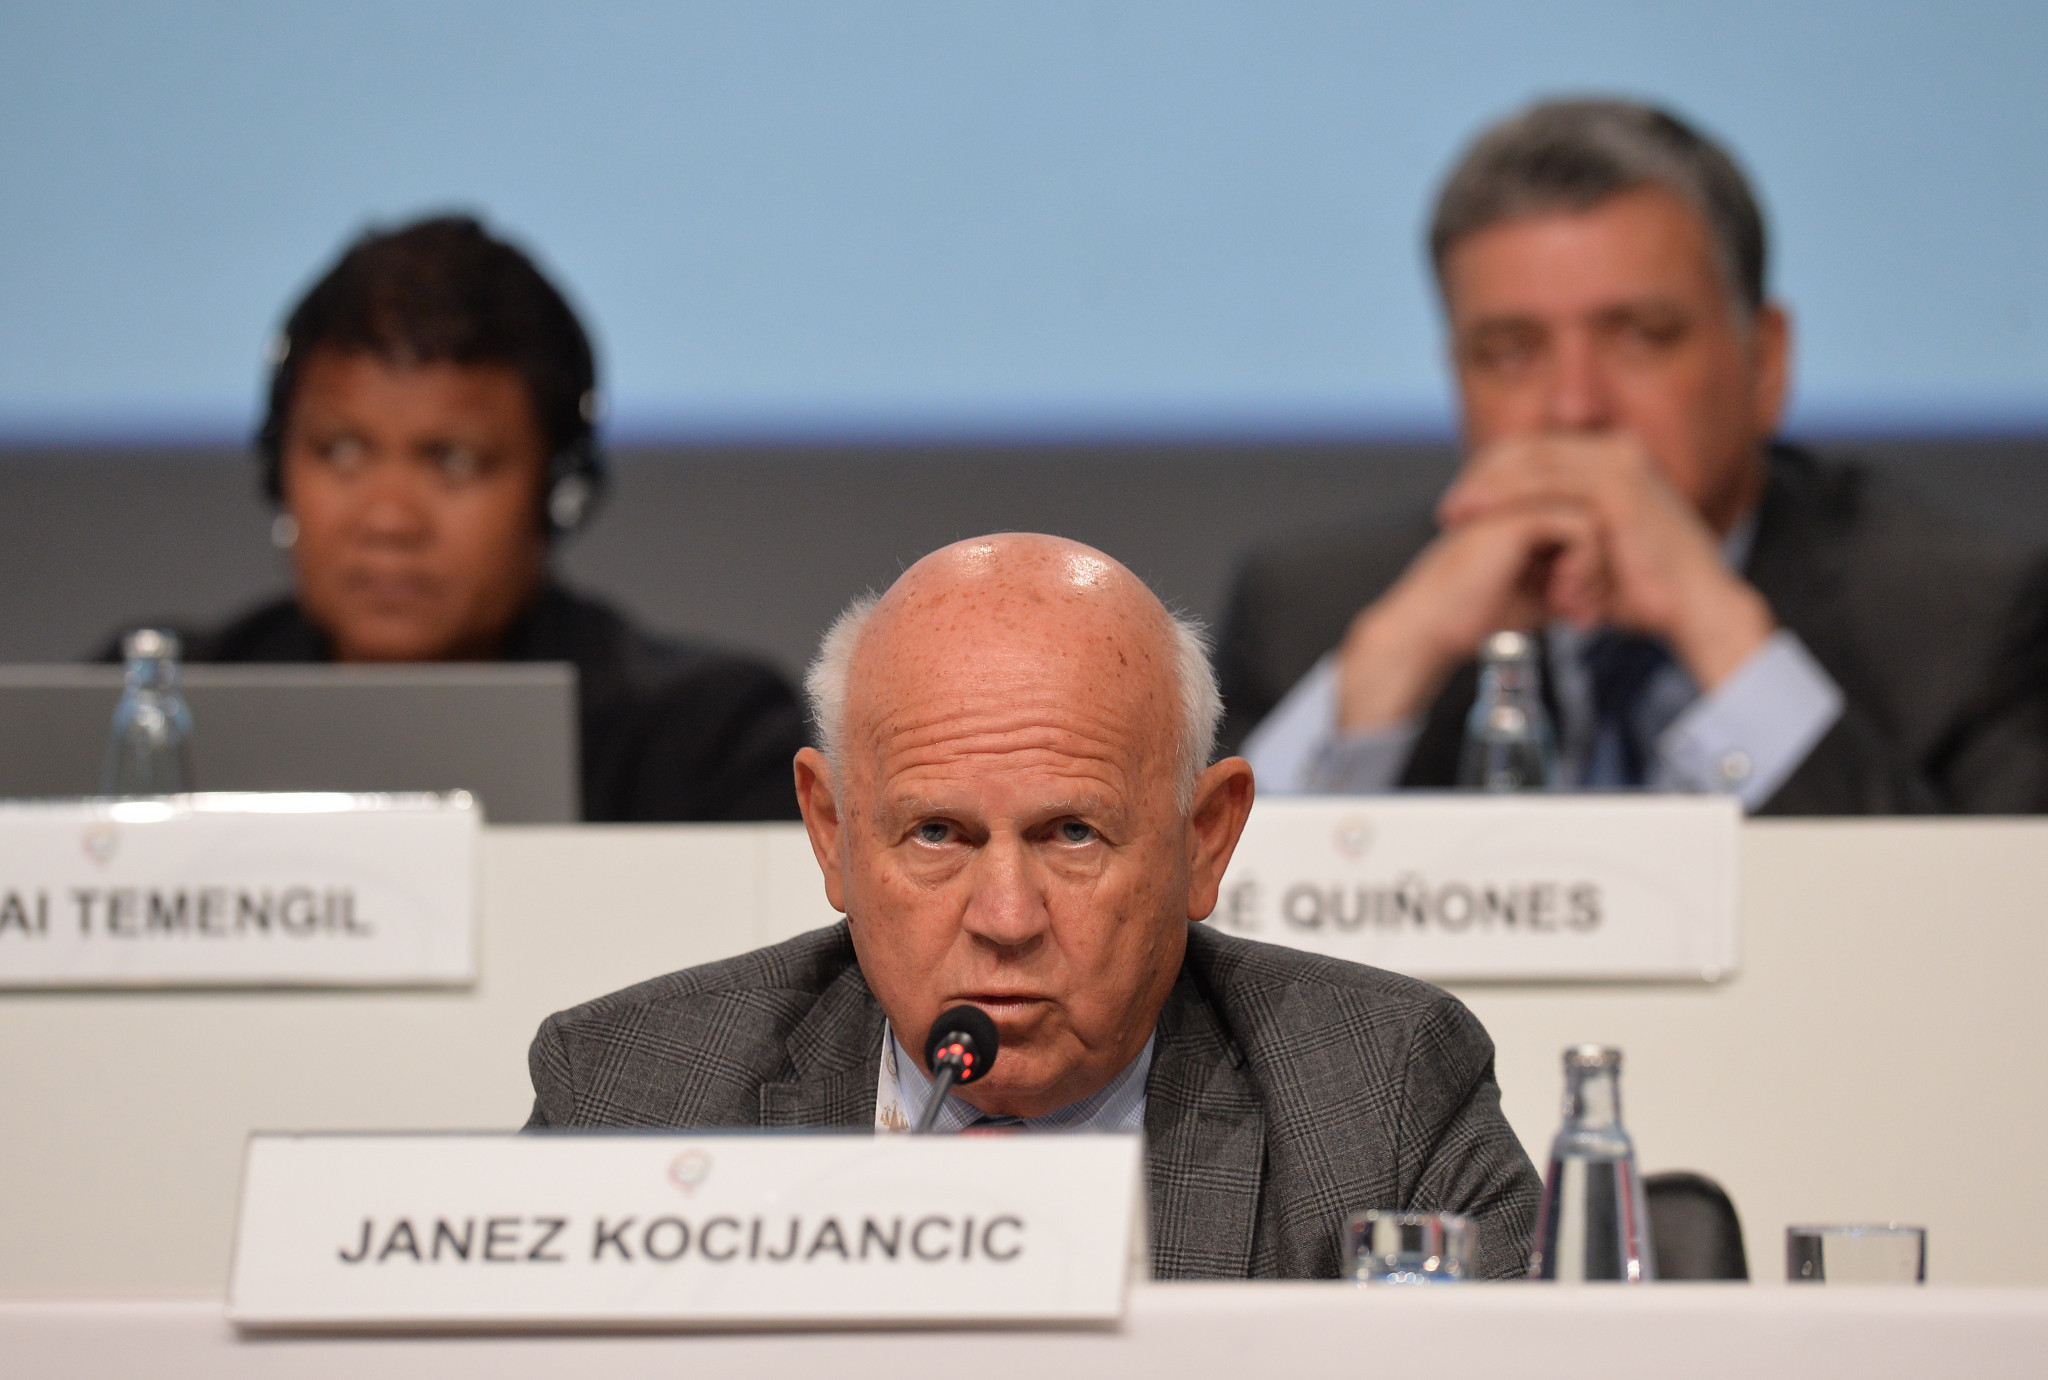 Janez Kocijančič has opposed the IOC decision on Russia ©Getty Images